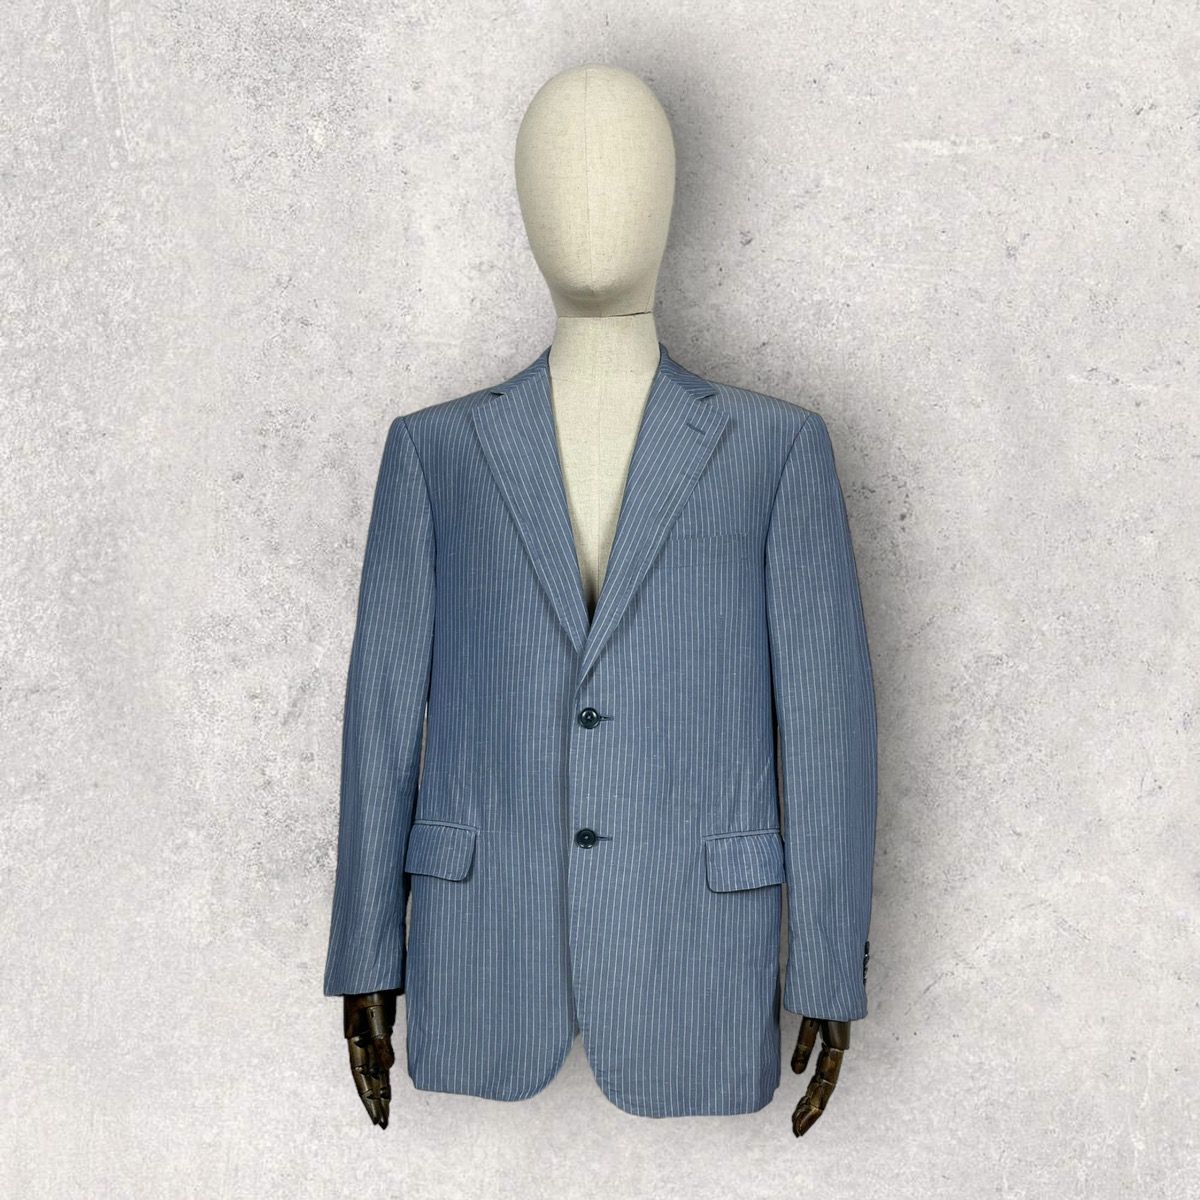 Pre-owned Fortino Made In Italy Pal Zileri Blazer Sports Jacket Silk & Linen Size 52r In Blue